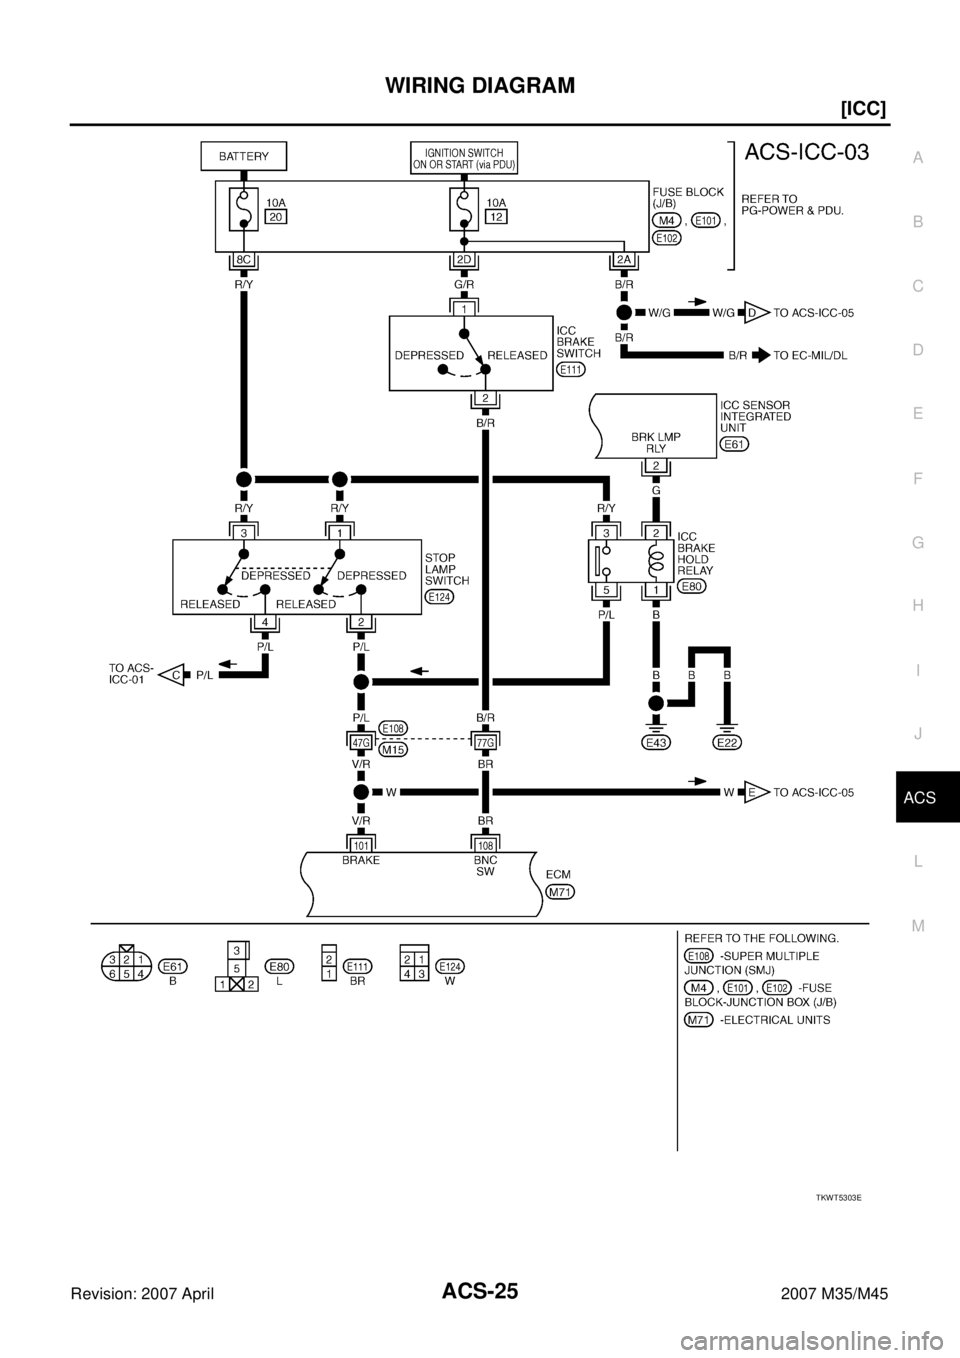 INFINITI M35 2007  Factory Owners Guide WIRING DIAGRAM
ACS-25
[ICC]
C
D
E
F
G
H
I
J
L
MA
B
ACS
Revision: 2007 April2007 M35/M45
TKWT5303E 